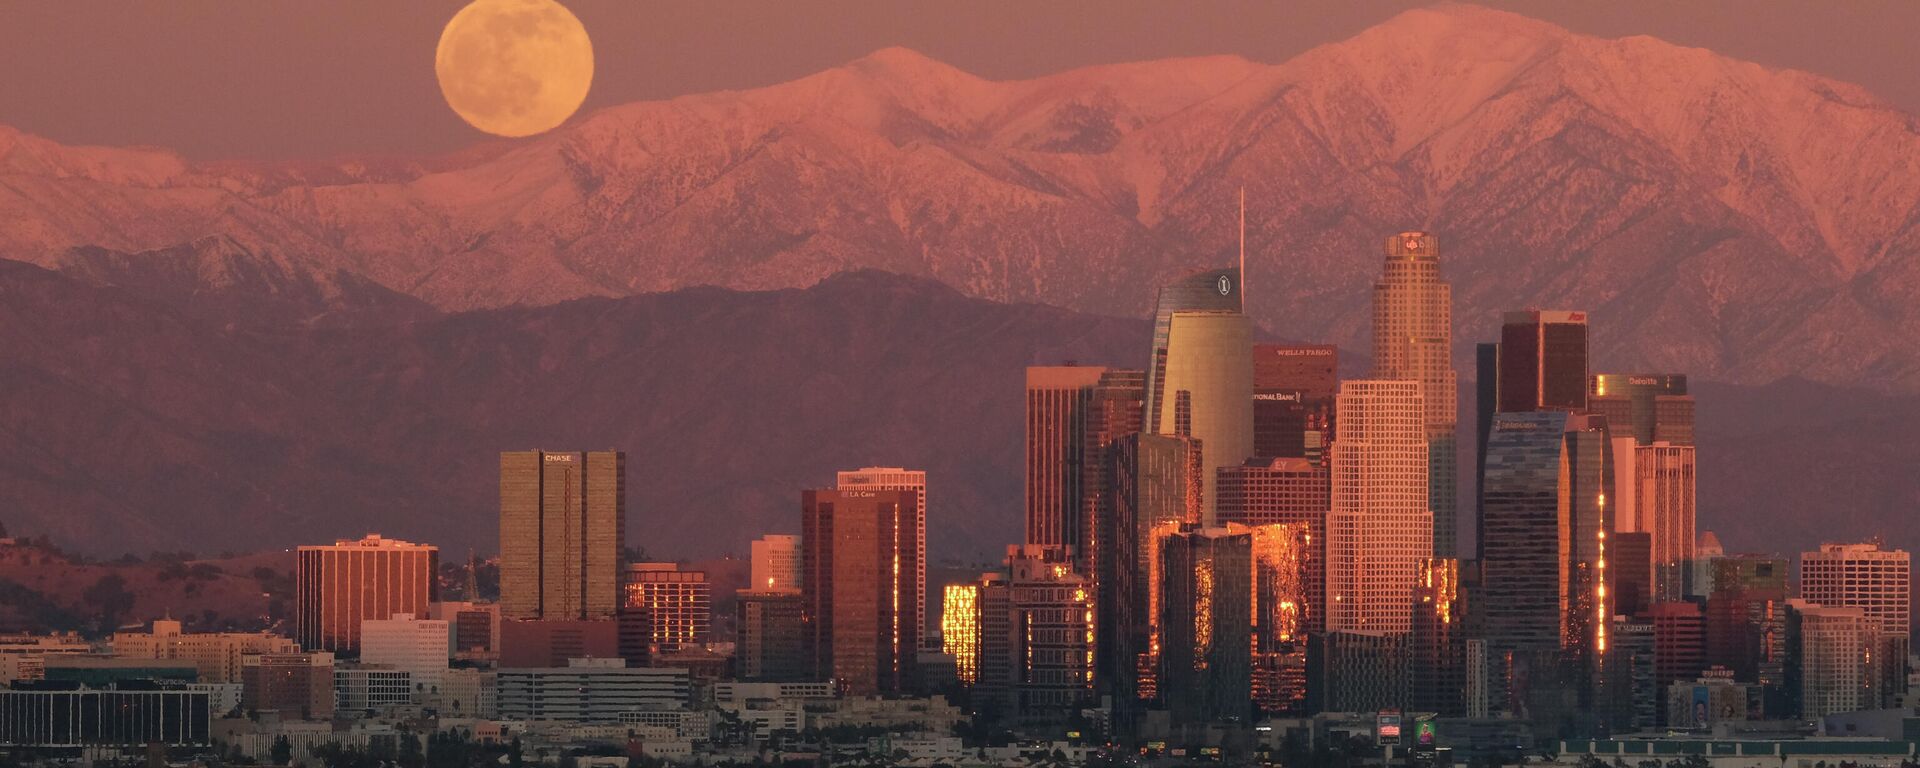 The full moon rises over snow covered mountains, behind the downtown Los Angeles skyline is seen from Kenneth Hahn State Recreation Area Tuesday, Dec. 29, 2020, in Los Angeles. - Sputnik International, 1920, 08.10.2022